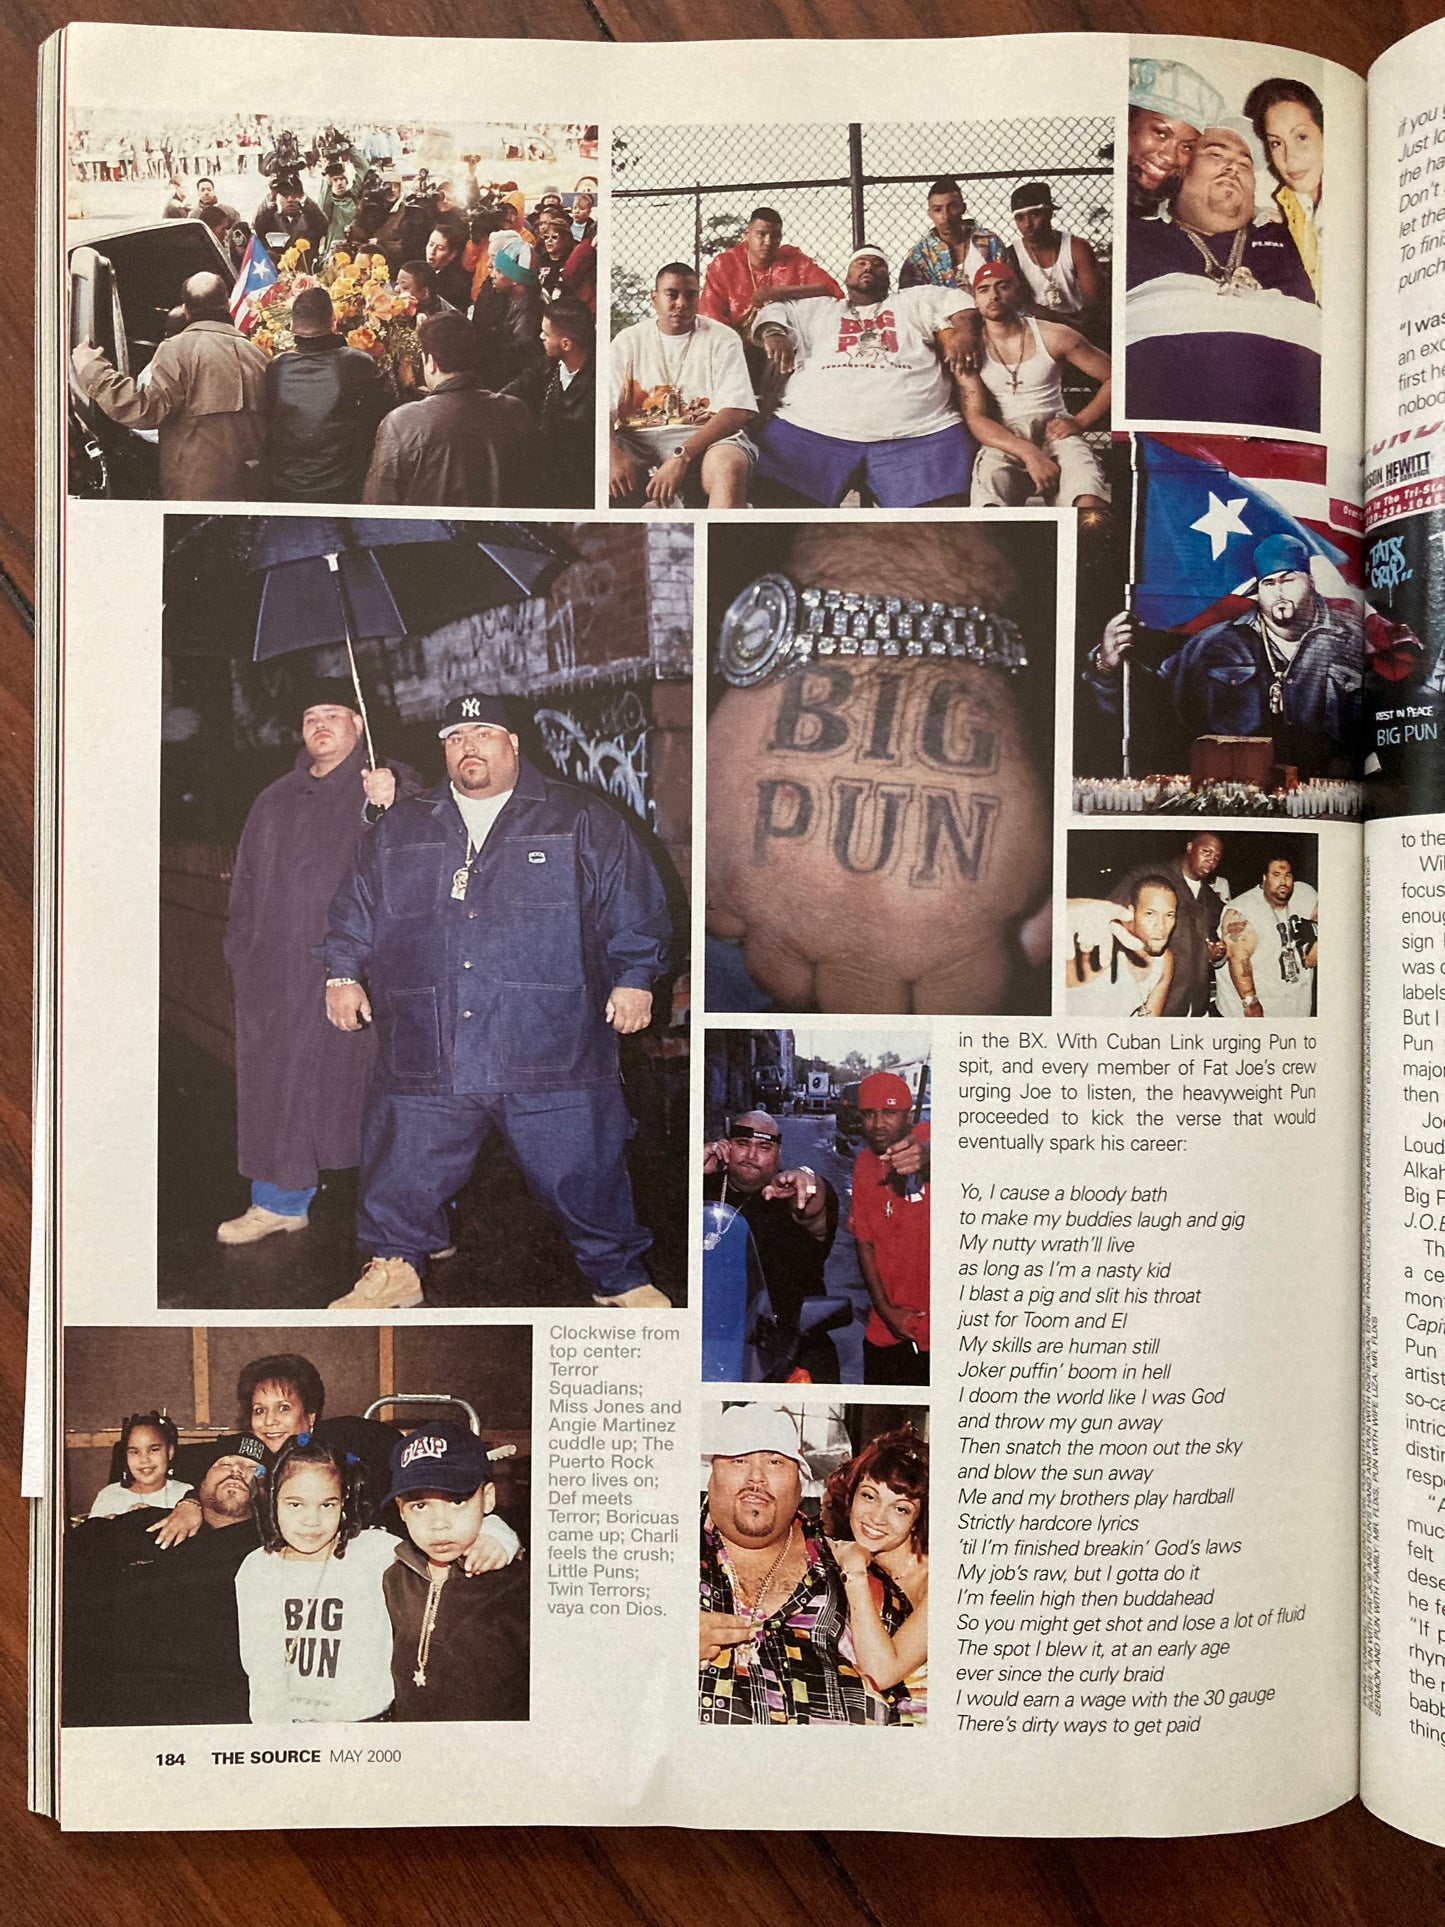 The Source Magazine May 2000 Big Pun - MoSneaks Shop Online